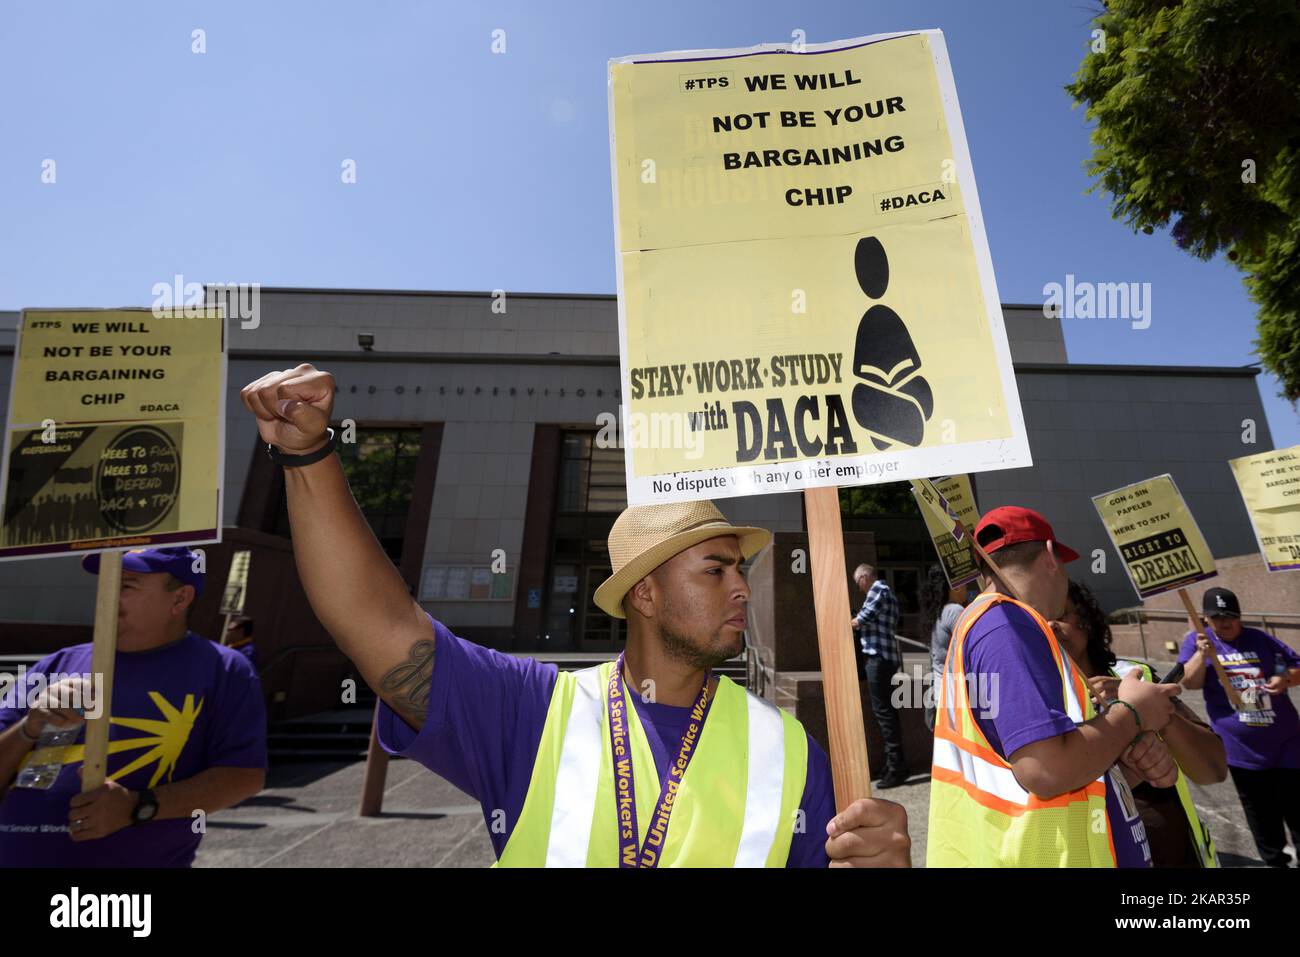 Immigration rights activists protest the Trump administration’s termination of the DACA program in Los Angeles, California on September 5, 2017. The Deferred Action for Childhood Arrivals program protected 800,000 young undocumented immigrants from deportation. (Photo by Ronen Tivony/NurPhoto) Stock Photo